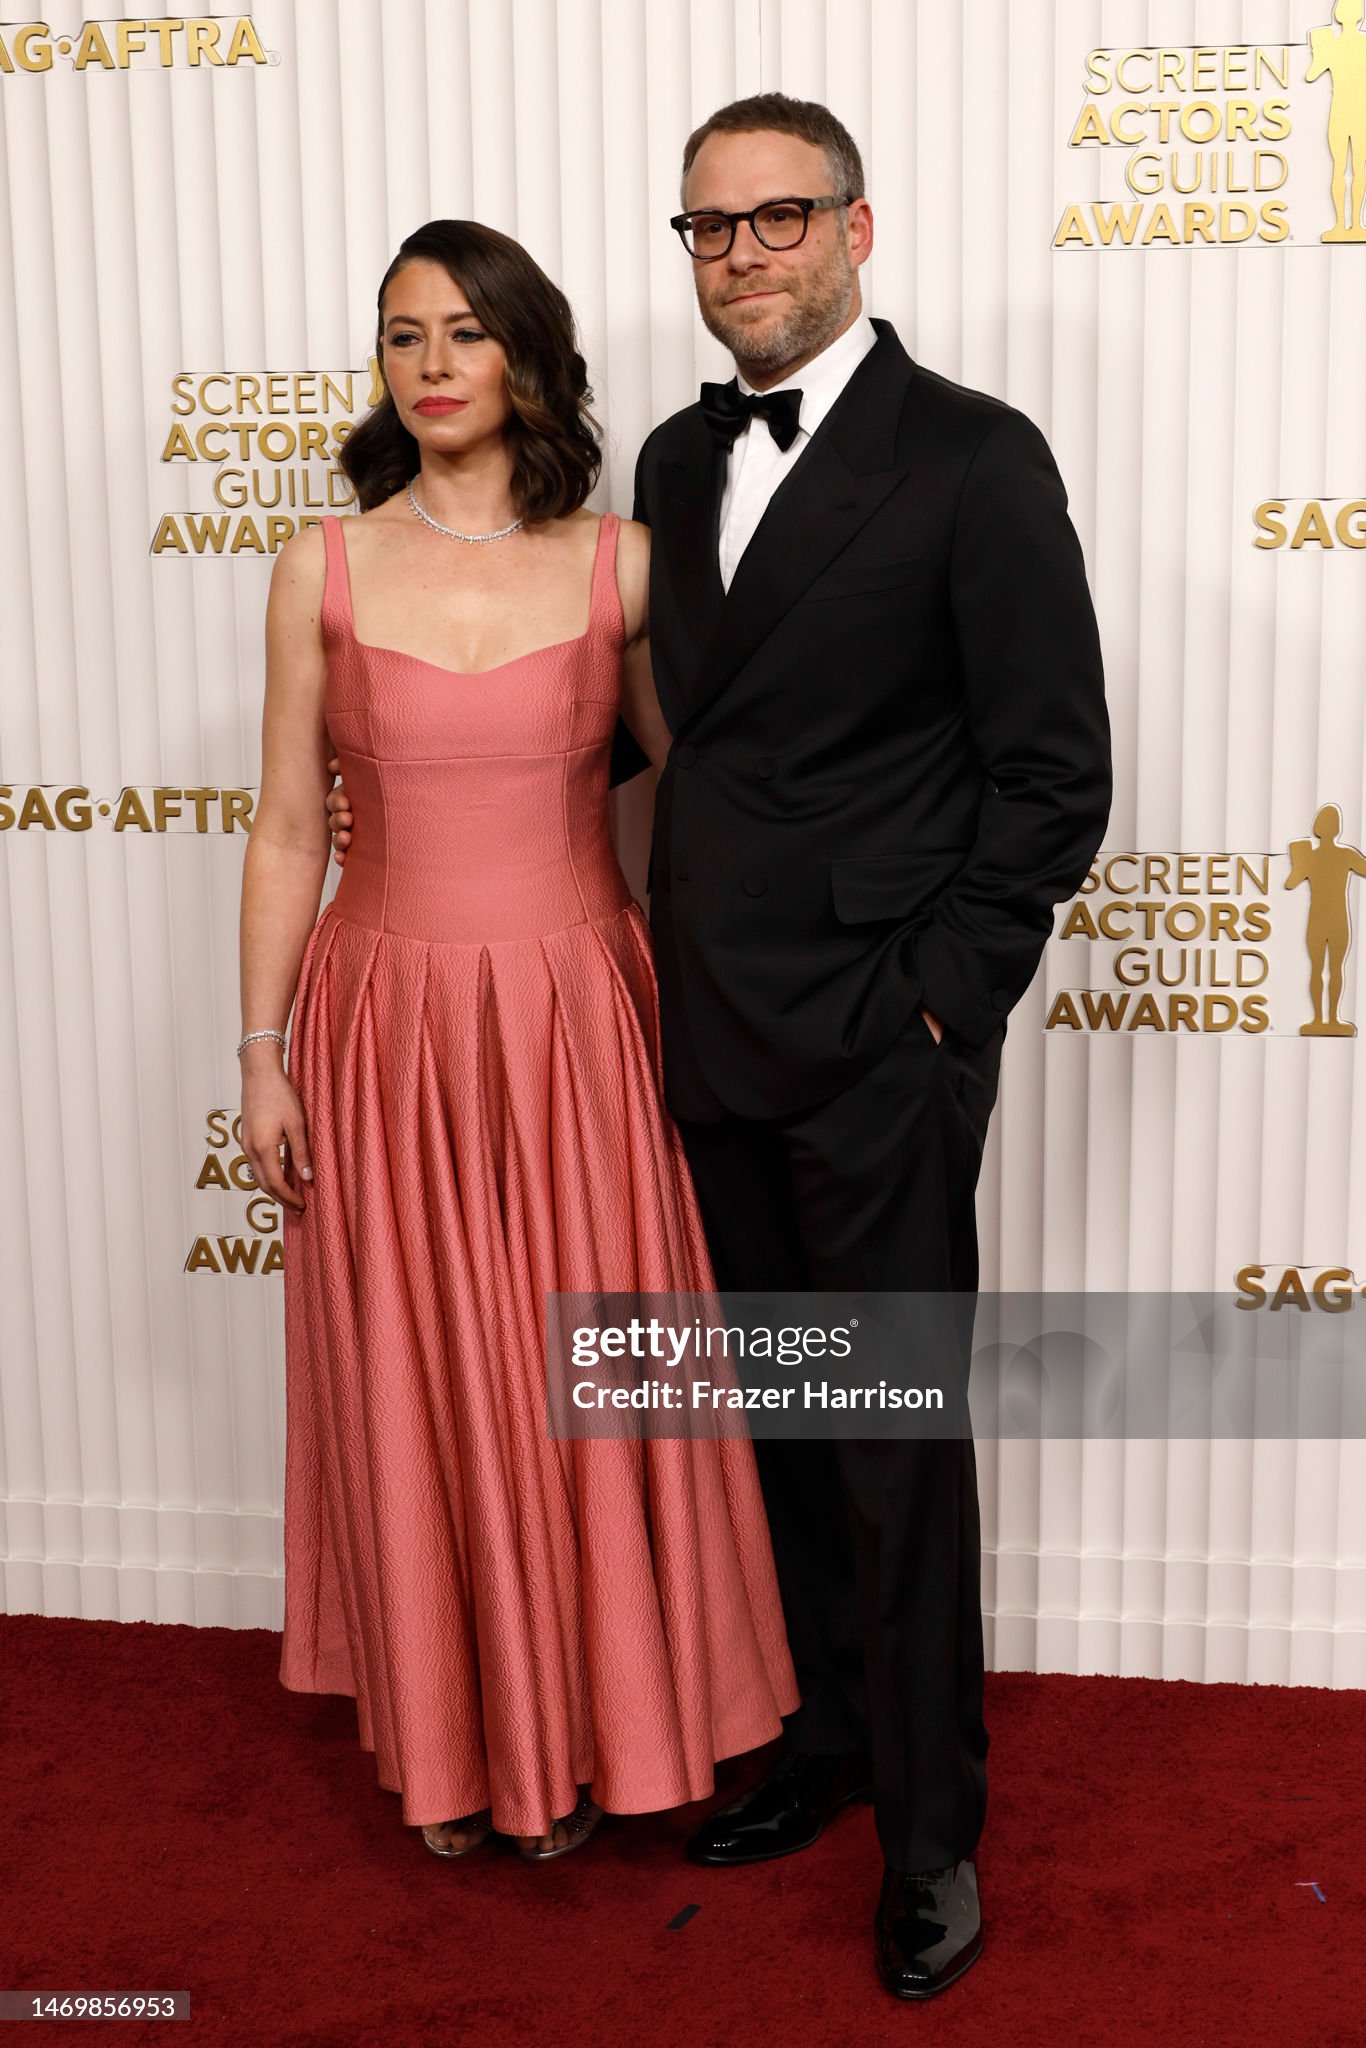 lauren-miller-rogen-and-seth-rogen-attend-the-29th-annual-screen-actors-guild-awards-at.jpg